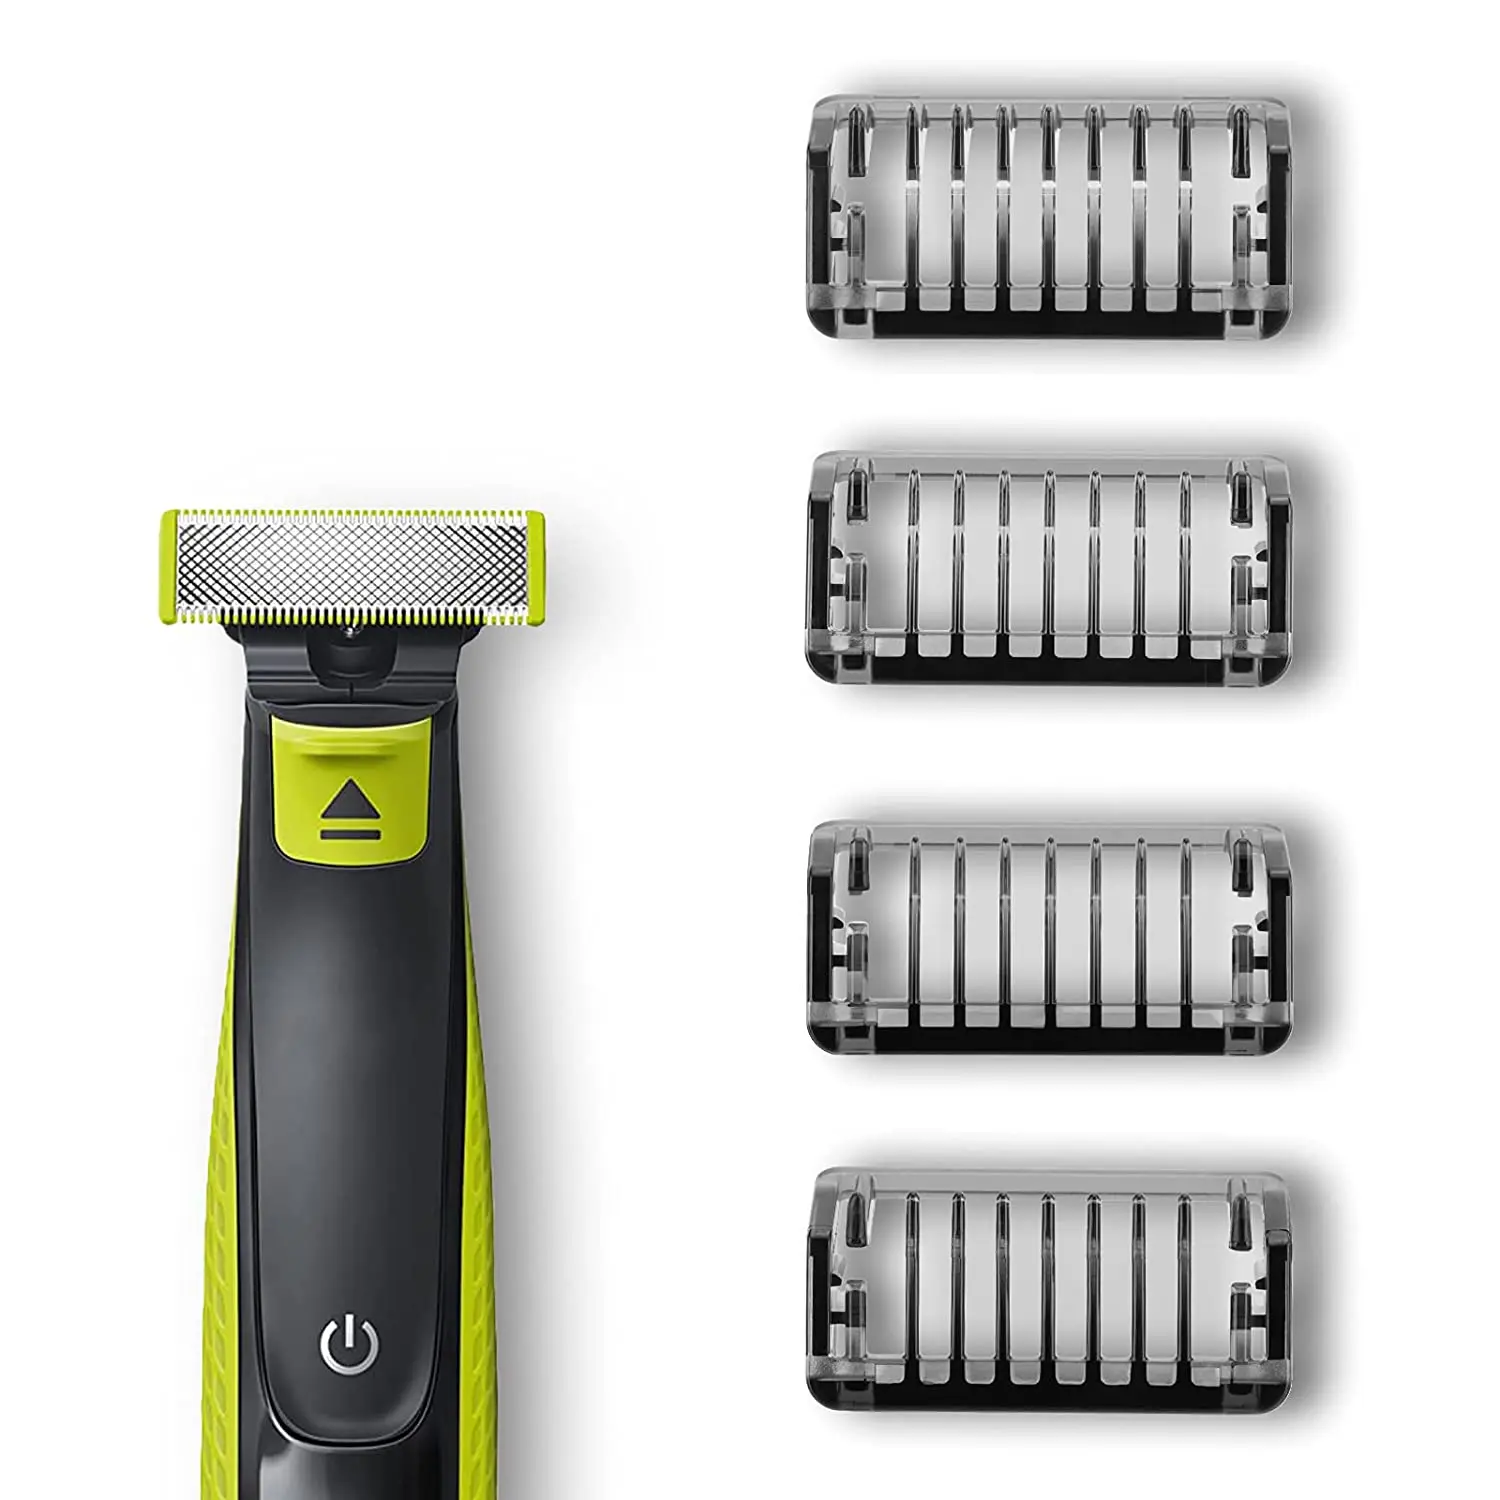 

Positioning Comb 1mm 2mm 3mm 5mm Shaver Beard Comb For Philips Norelco Oneblade Qp2520 Qp2530 Qp2620 Qp2630 Qp6510 Qp6520